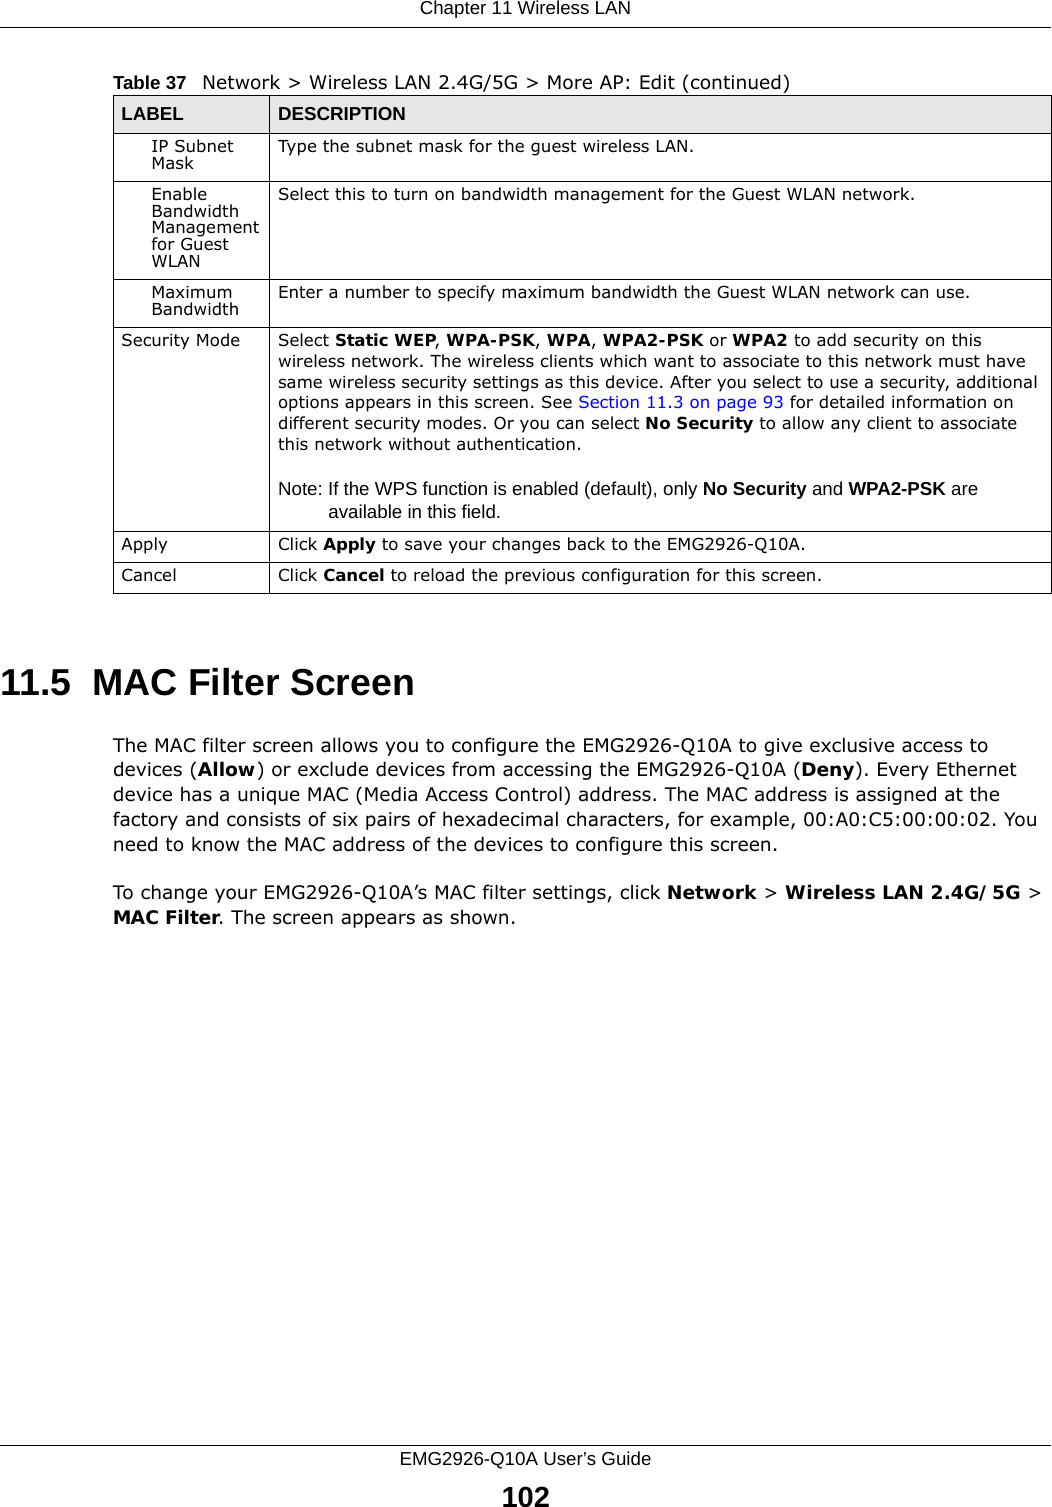 Chapter 11 Wireless LANEMG2926-Q10A User’s Guide10211.5  MAC Filter Screen The MAC filter screen allows you to configure the EMG2926-Q10A to give exclusive access to devices (Allow) or exclude devices from accessing the EMG2926-Q10A (Deny). Every Ethernet device has a unique MAC (Media Access Control) address. The MAC address is assigned at the factory and consists of six pairs of hexadecimal characters, for example, 00:A0:C5:00:00:02. You need to know the MAC address of the devices to configure this screen.To change your EMG2926-Q10A’s MAC filter settings, click Network &gt; Wireless LAN 2.4G/5G &gt; MAC Filter. The screen appears as shown.IP Subnet Mask  Type the subnet mask for the guest wireless LAN.Enable Bandwidth Management for Guest WLAN Select this to turn on bandwidth management for the Guest WLAN network.Maximum Bandwidth  Enter a number to specify maximum bandwidth the Guest WLAN network can use.Security Mode Select Static WEP, WPA-PSK, WPA, WPA2-PSK or WPA2 to add security on this wireless network. The wireless clients which want to associate to this network must have same wireless security settings as this device. After you select to use a security, additional options appears in this screen. See Section 11.3 on page 93 for detailed information on different security modes. Or you can select No Security to allow any client to associate this network without authentication.Note: If the WPS function is enabled (default), only No Security and WPA2-PSK are available in this field.Apply Click Apply to save your changes back to the EMG2926-Q10A.Cancel Click Cancel to reload the previous configuration for this screen.Table 37   Network &gt; Wireless LAN 2.4G/5G &gt; More AP: Edit (continued)LABEL DESCRIPTION